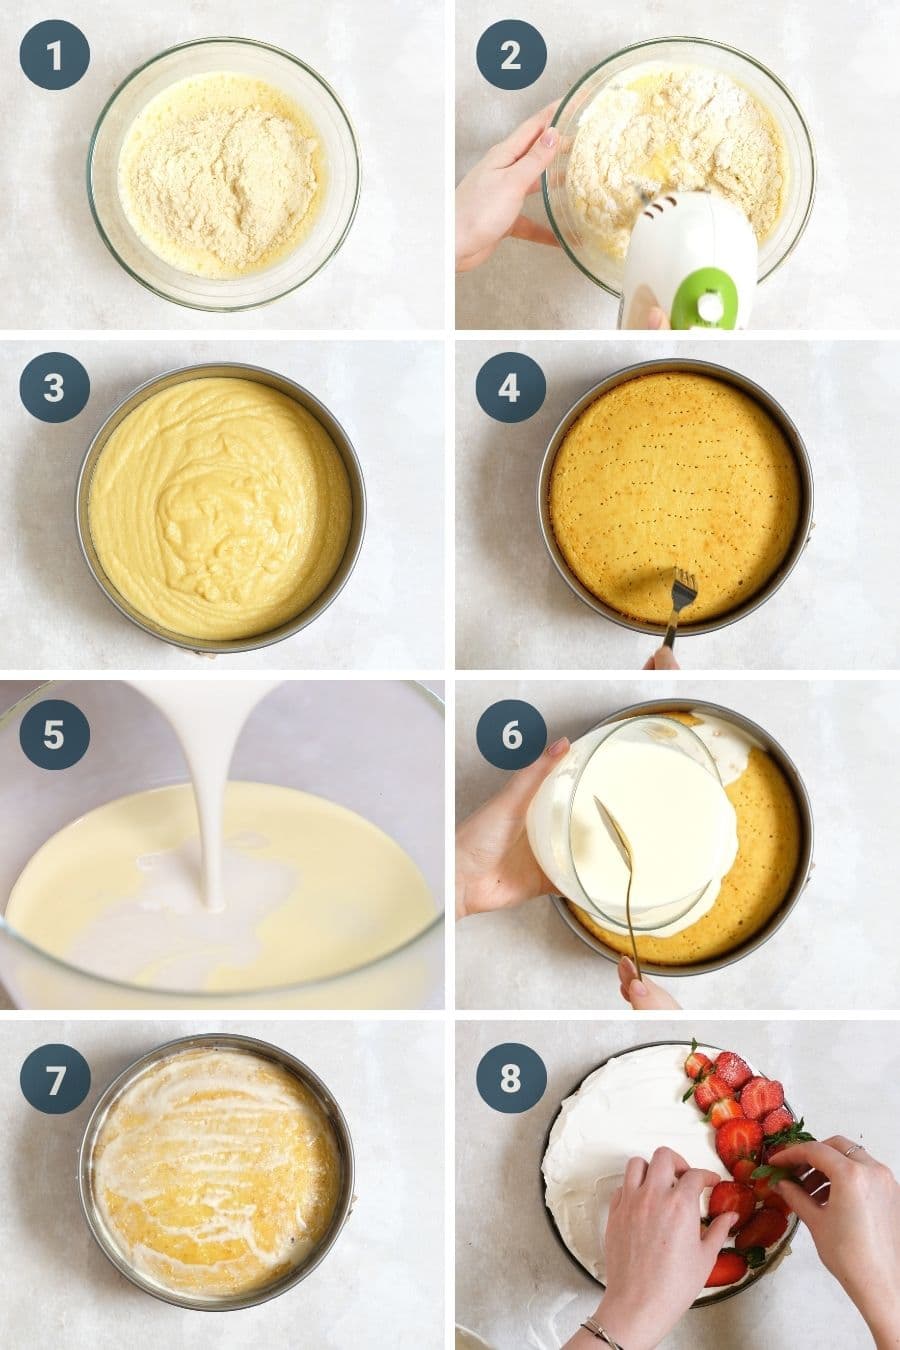 Keto Tres Leches cake step by step instructions